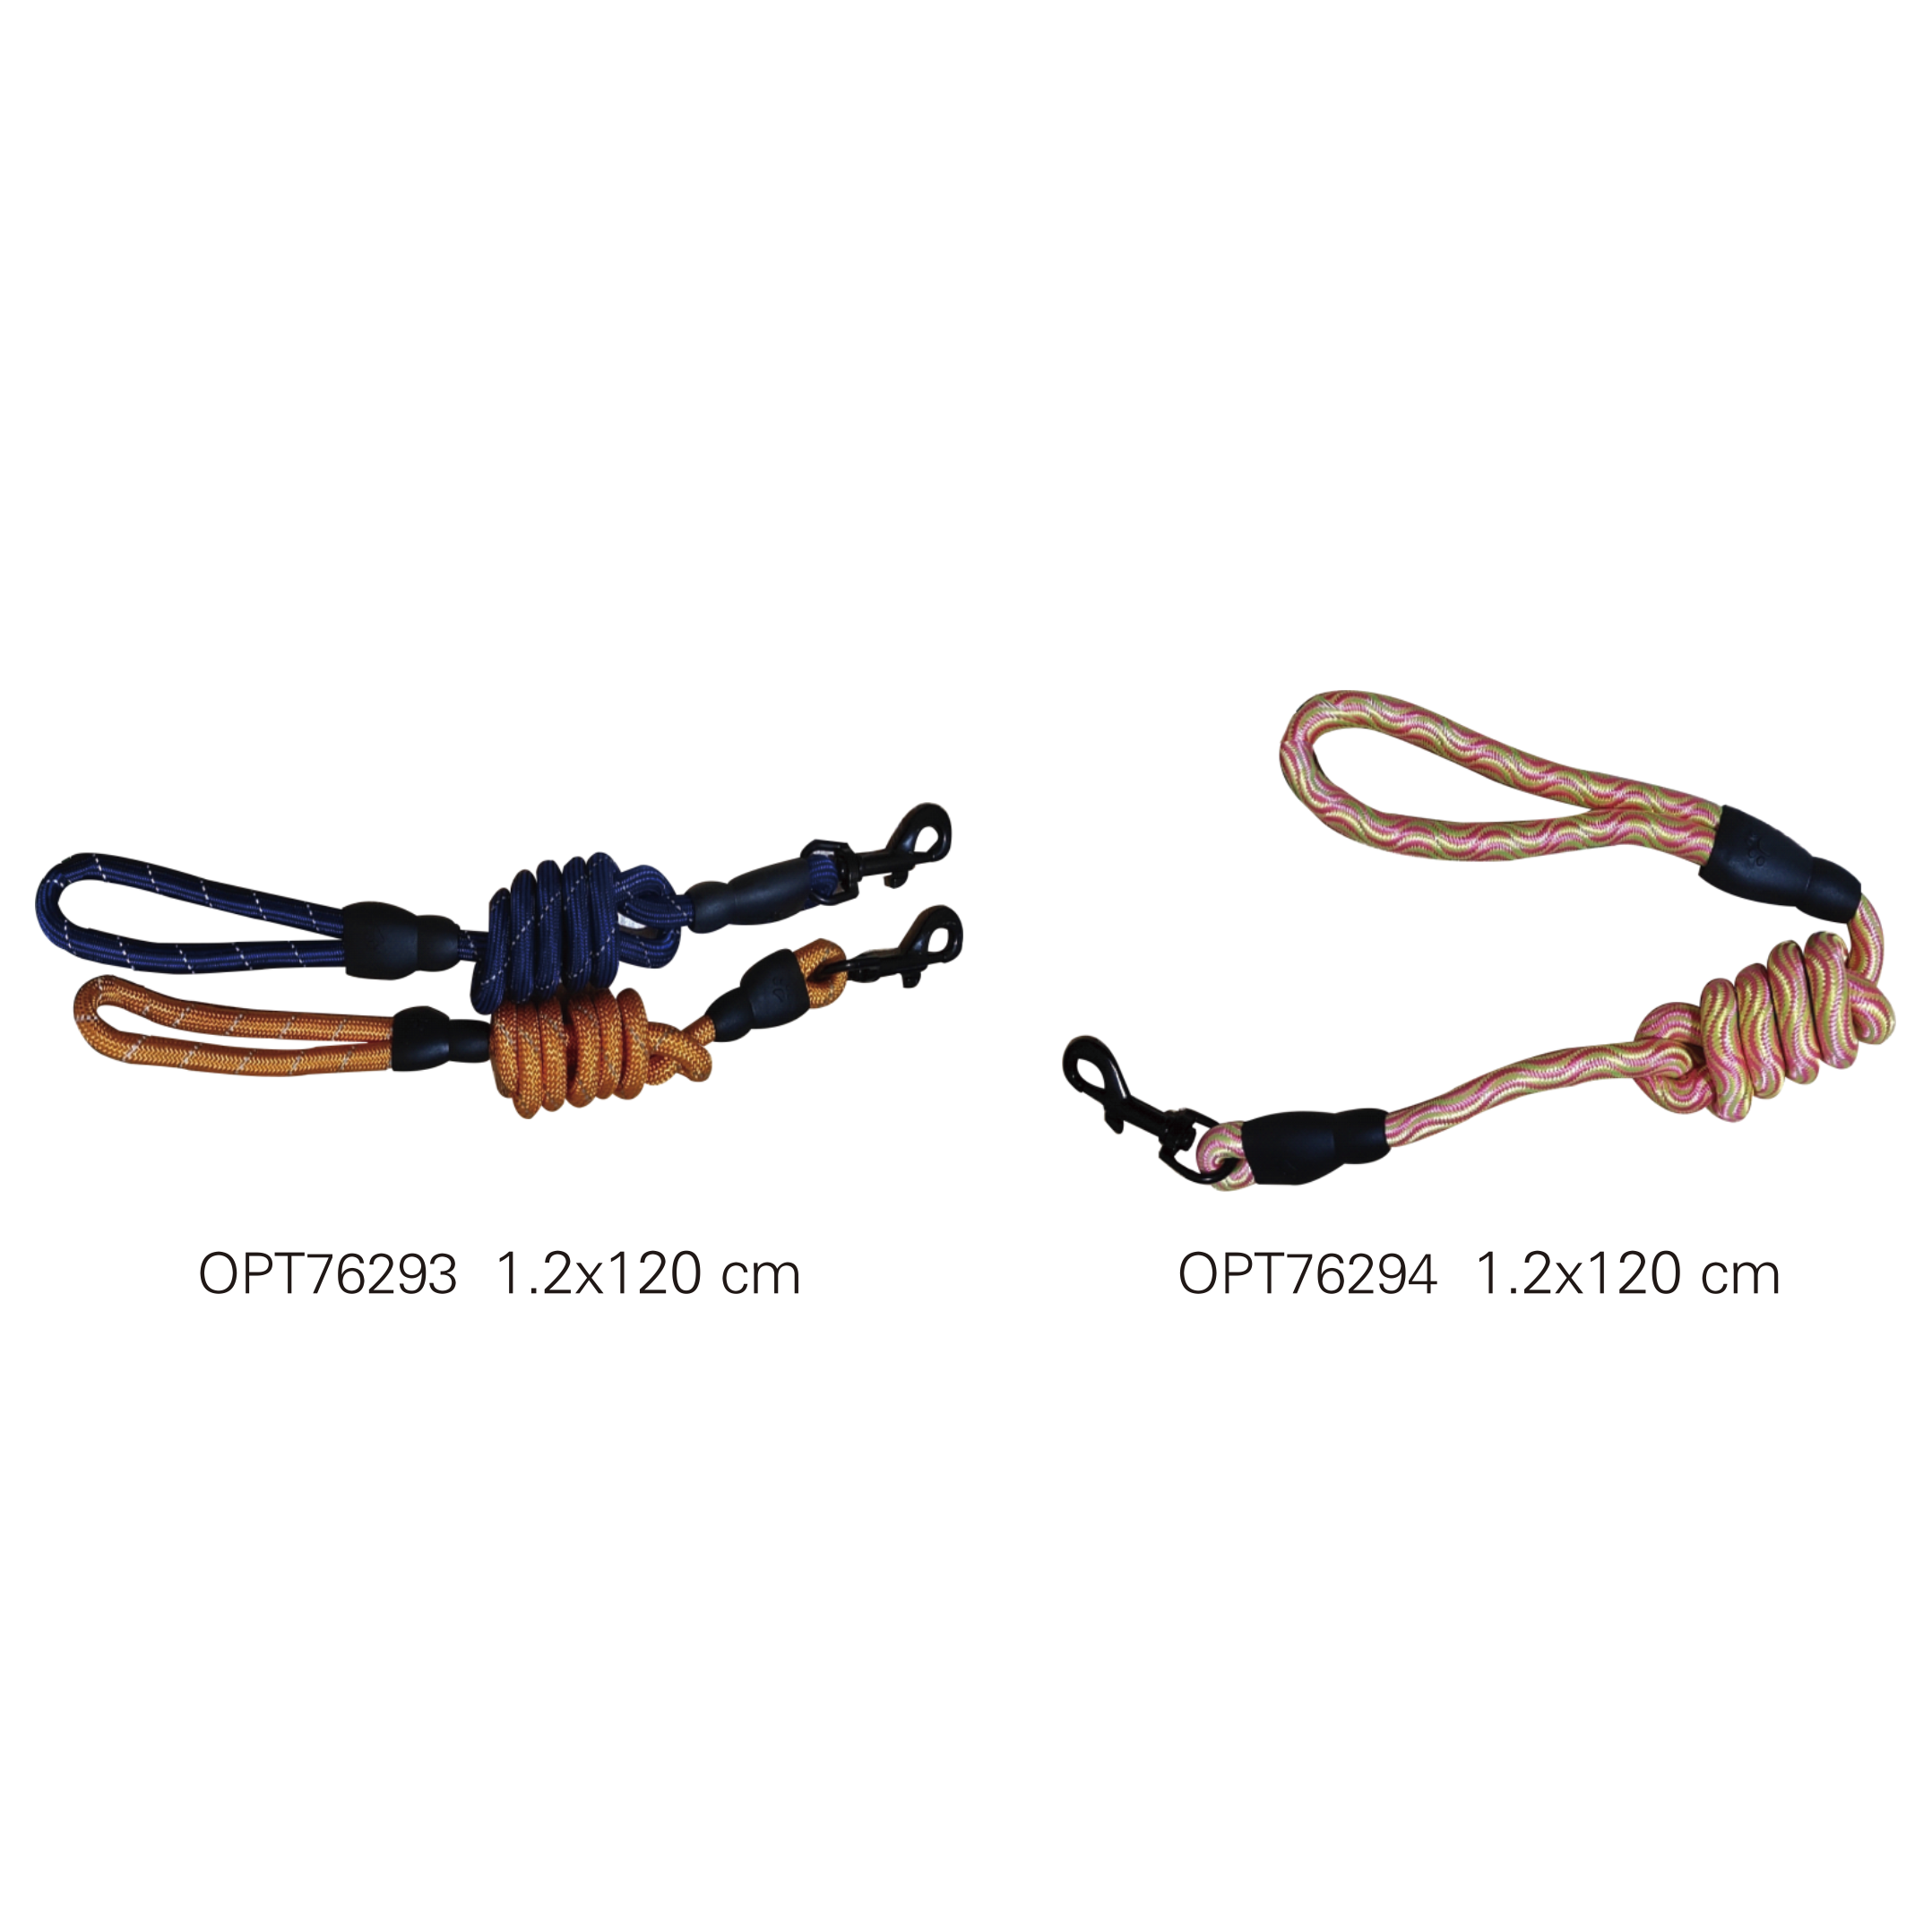 OPT76293-OPT76294 Pet leashes